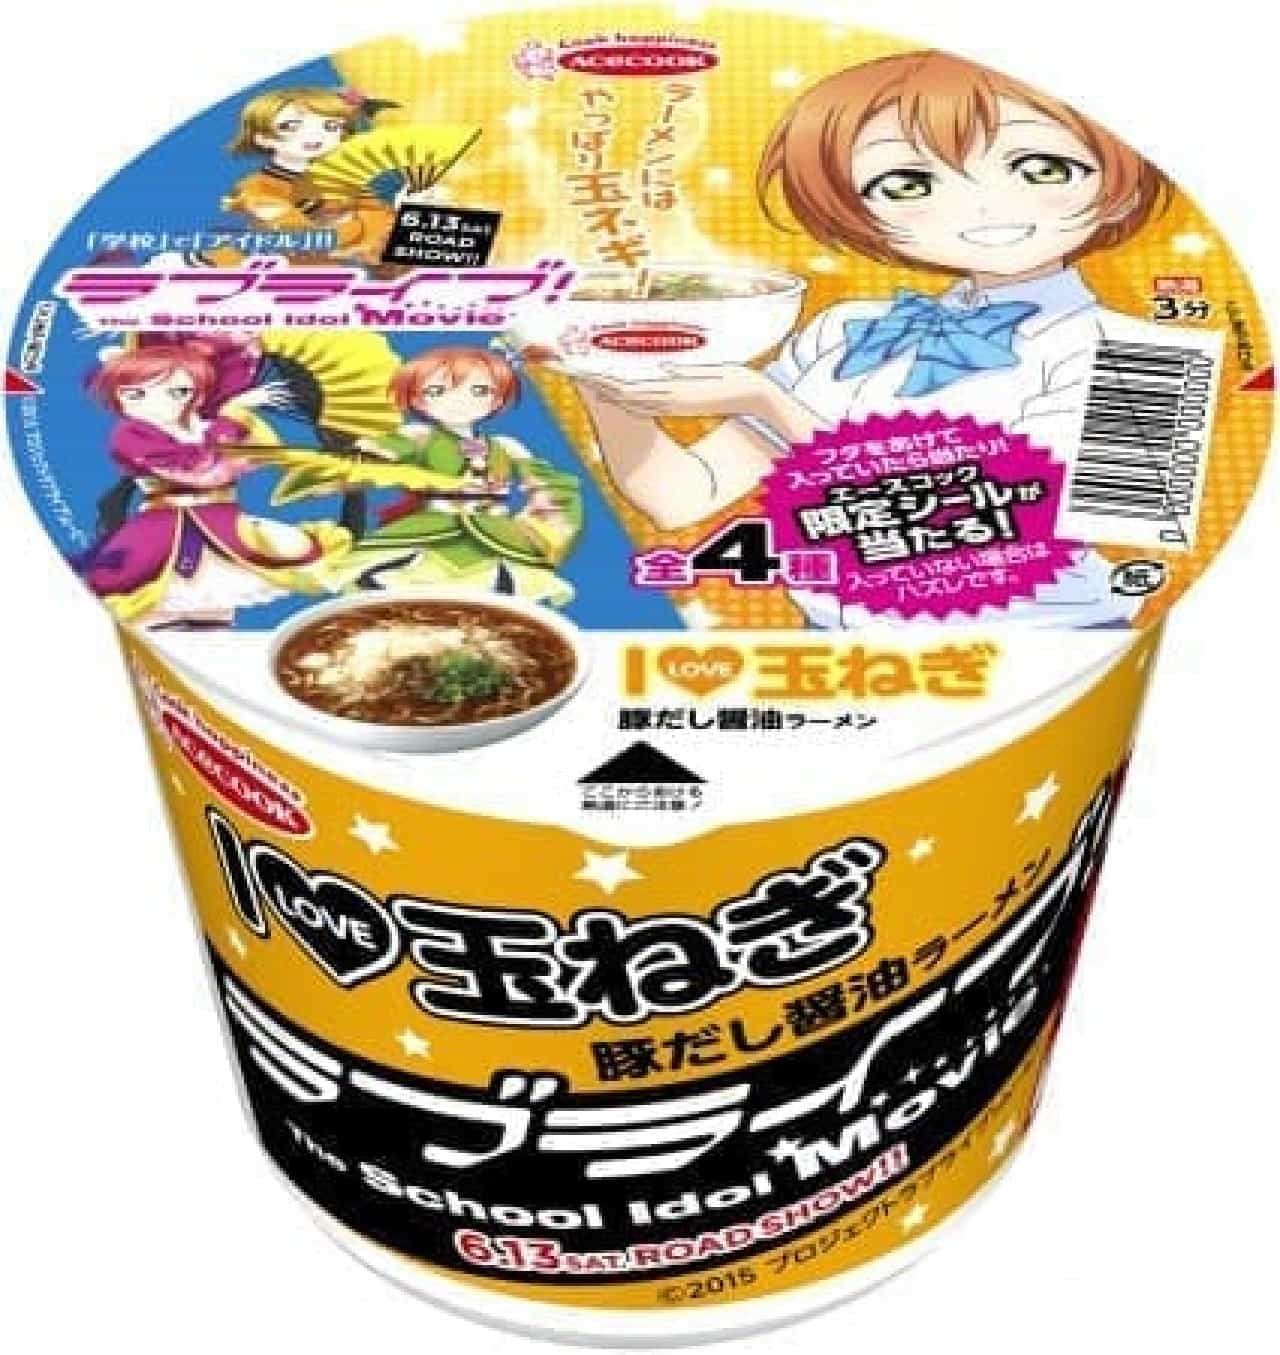 Rin's specialty is "cup noodles"